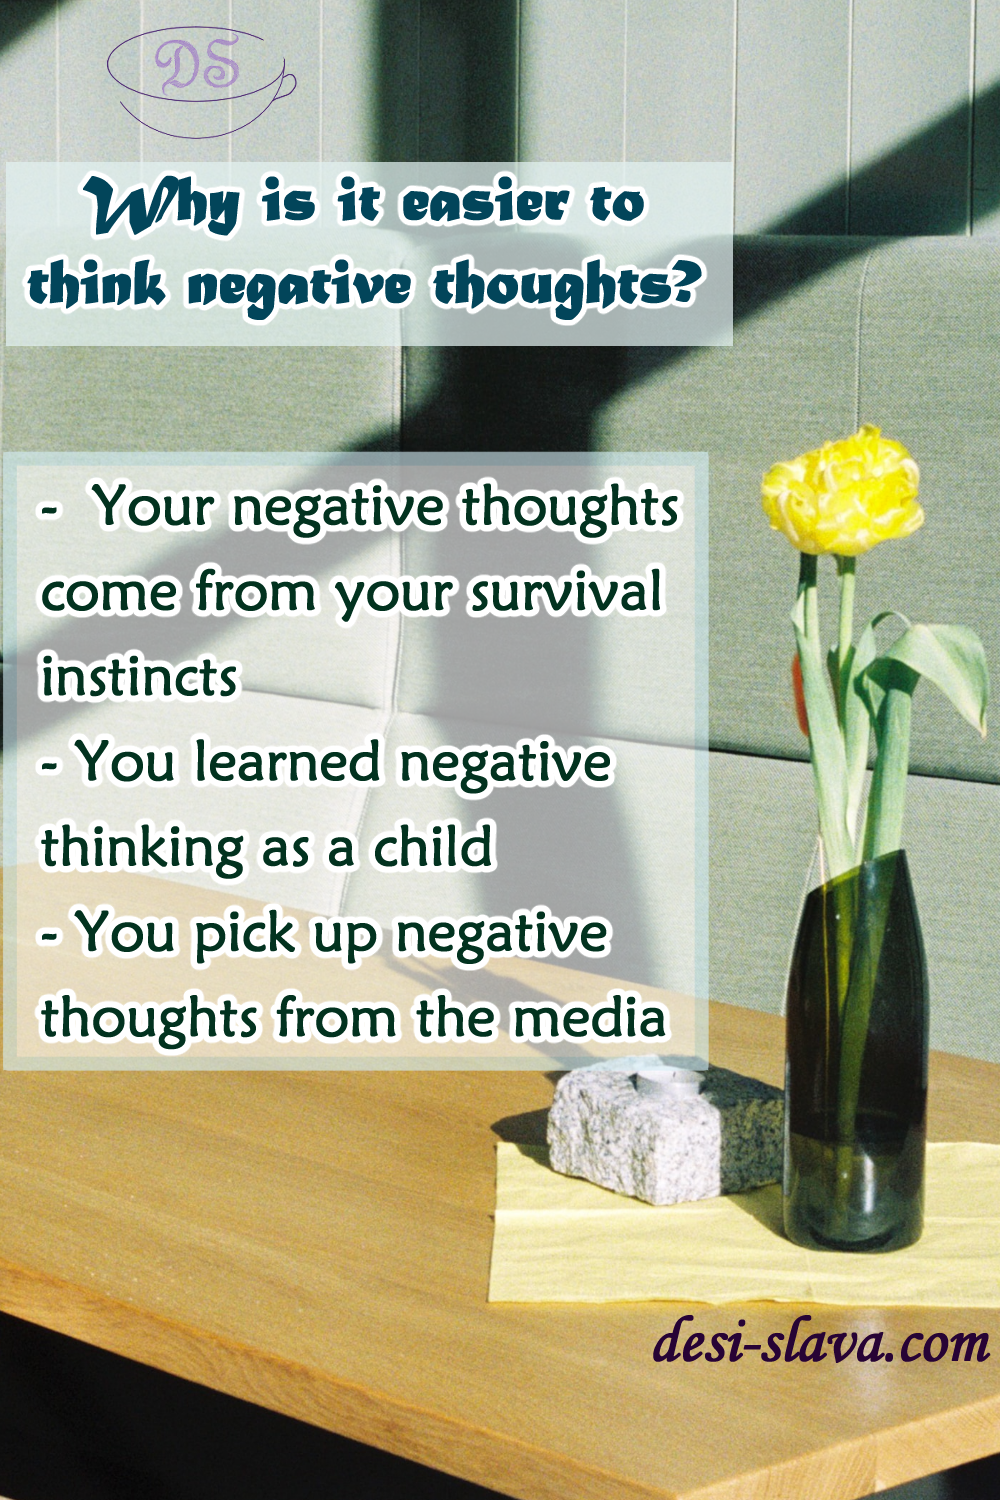 Why Is It Easier to Think Negative Thoughts?